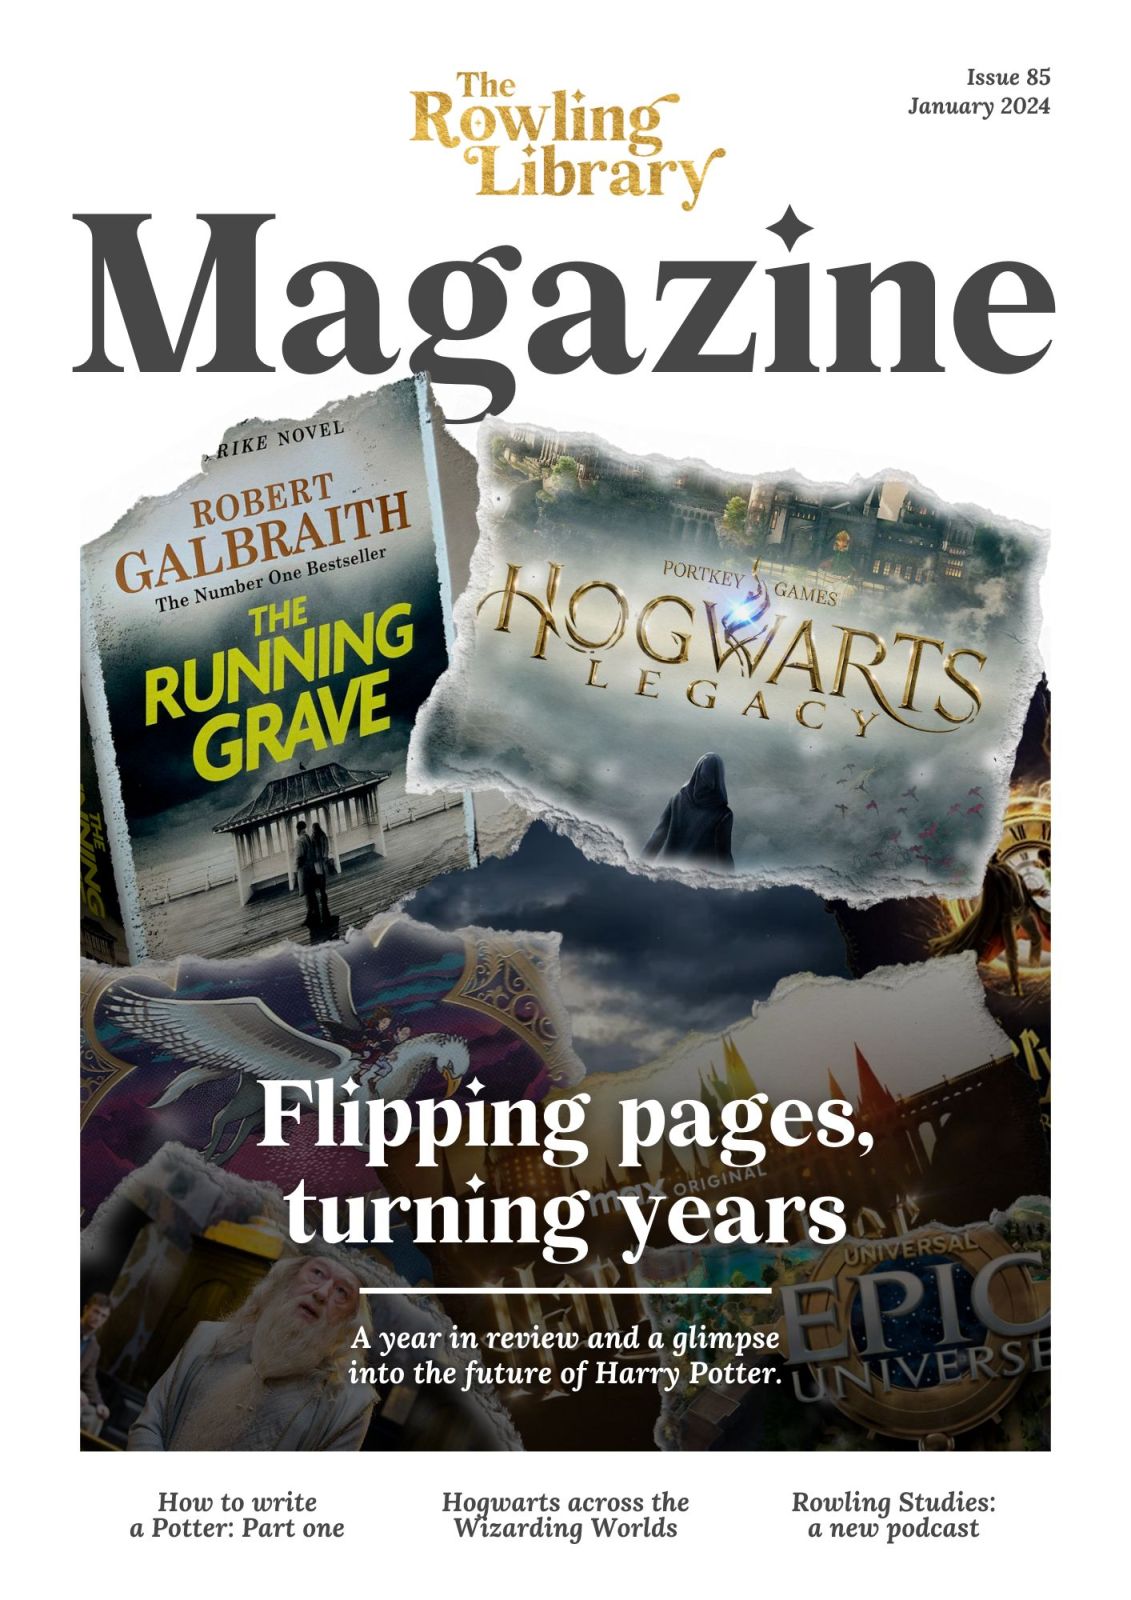 The Rowling Library Magazine #85 (January 2024): Flipping pages, turning years